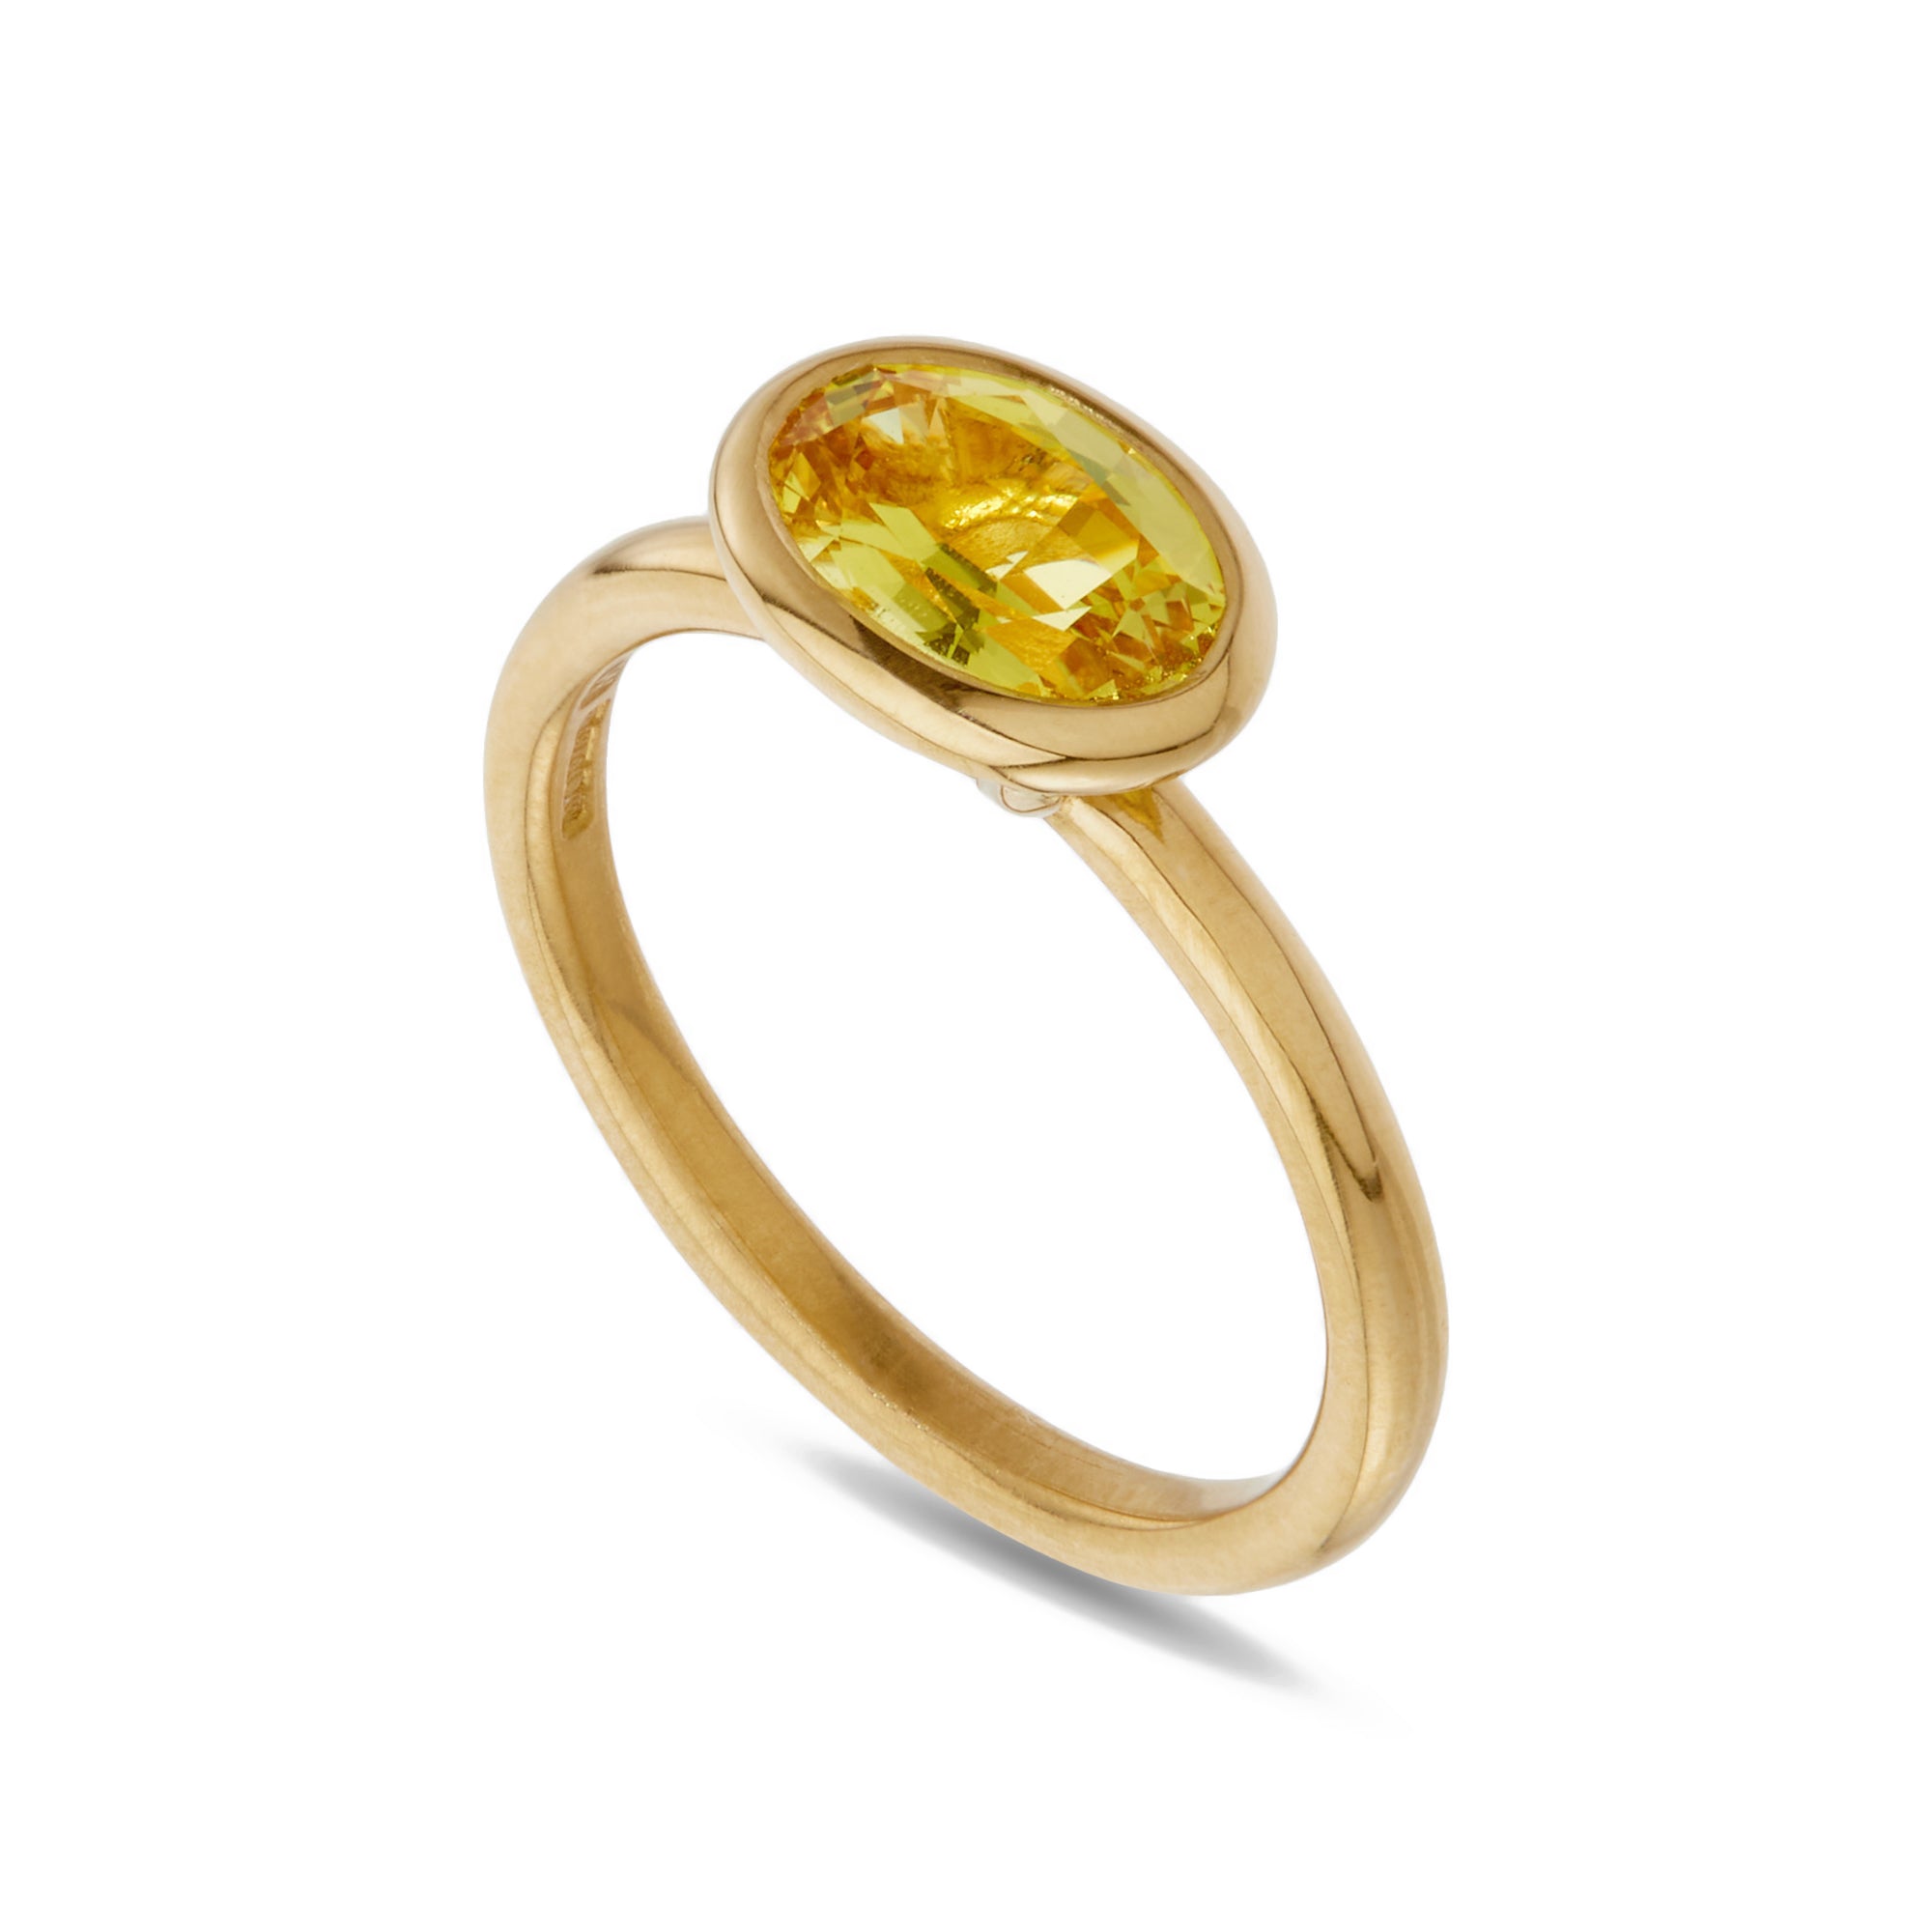 William Welstead - Yellow Sapphire Oval Ring view 2